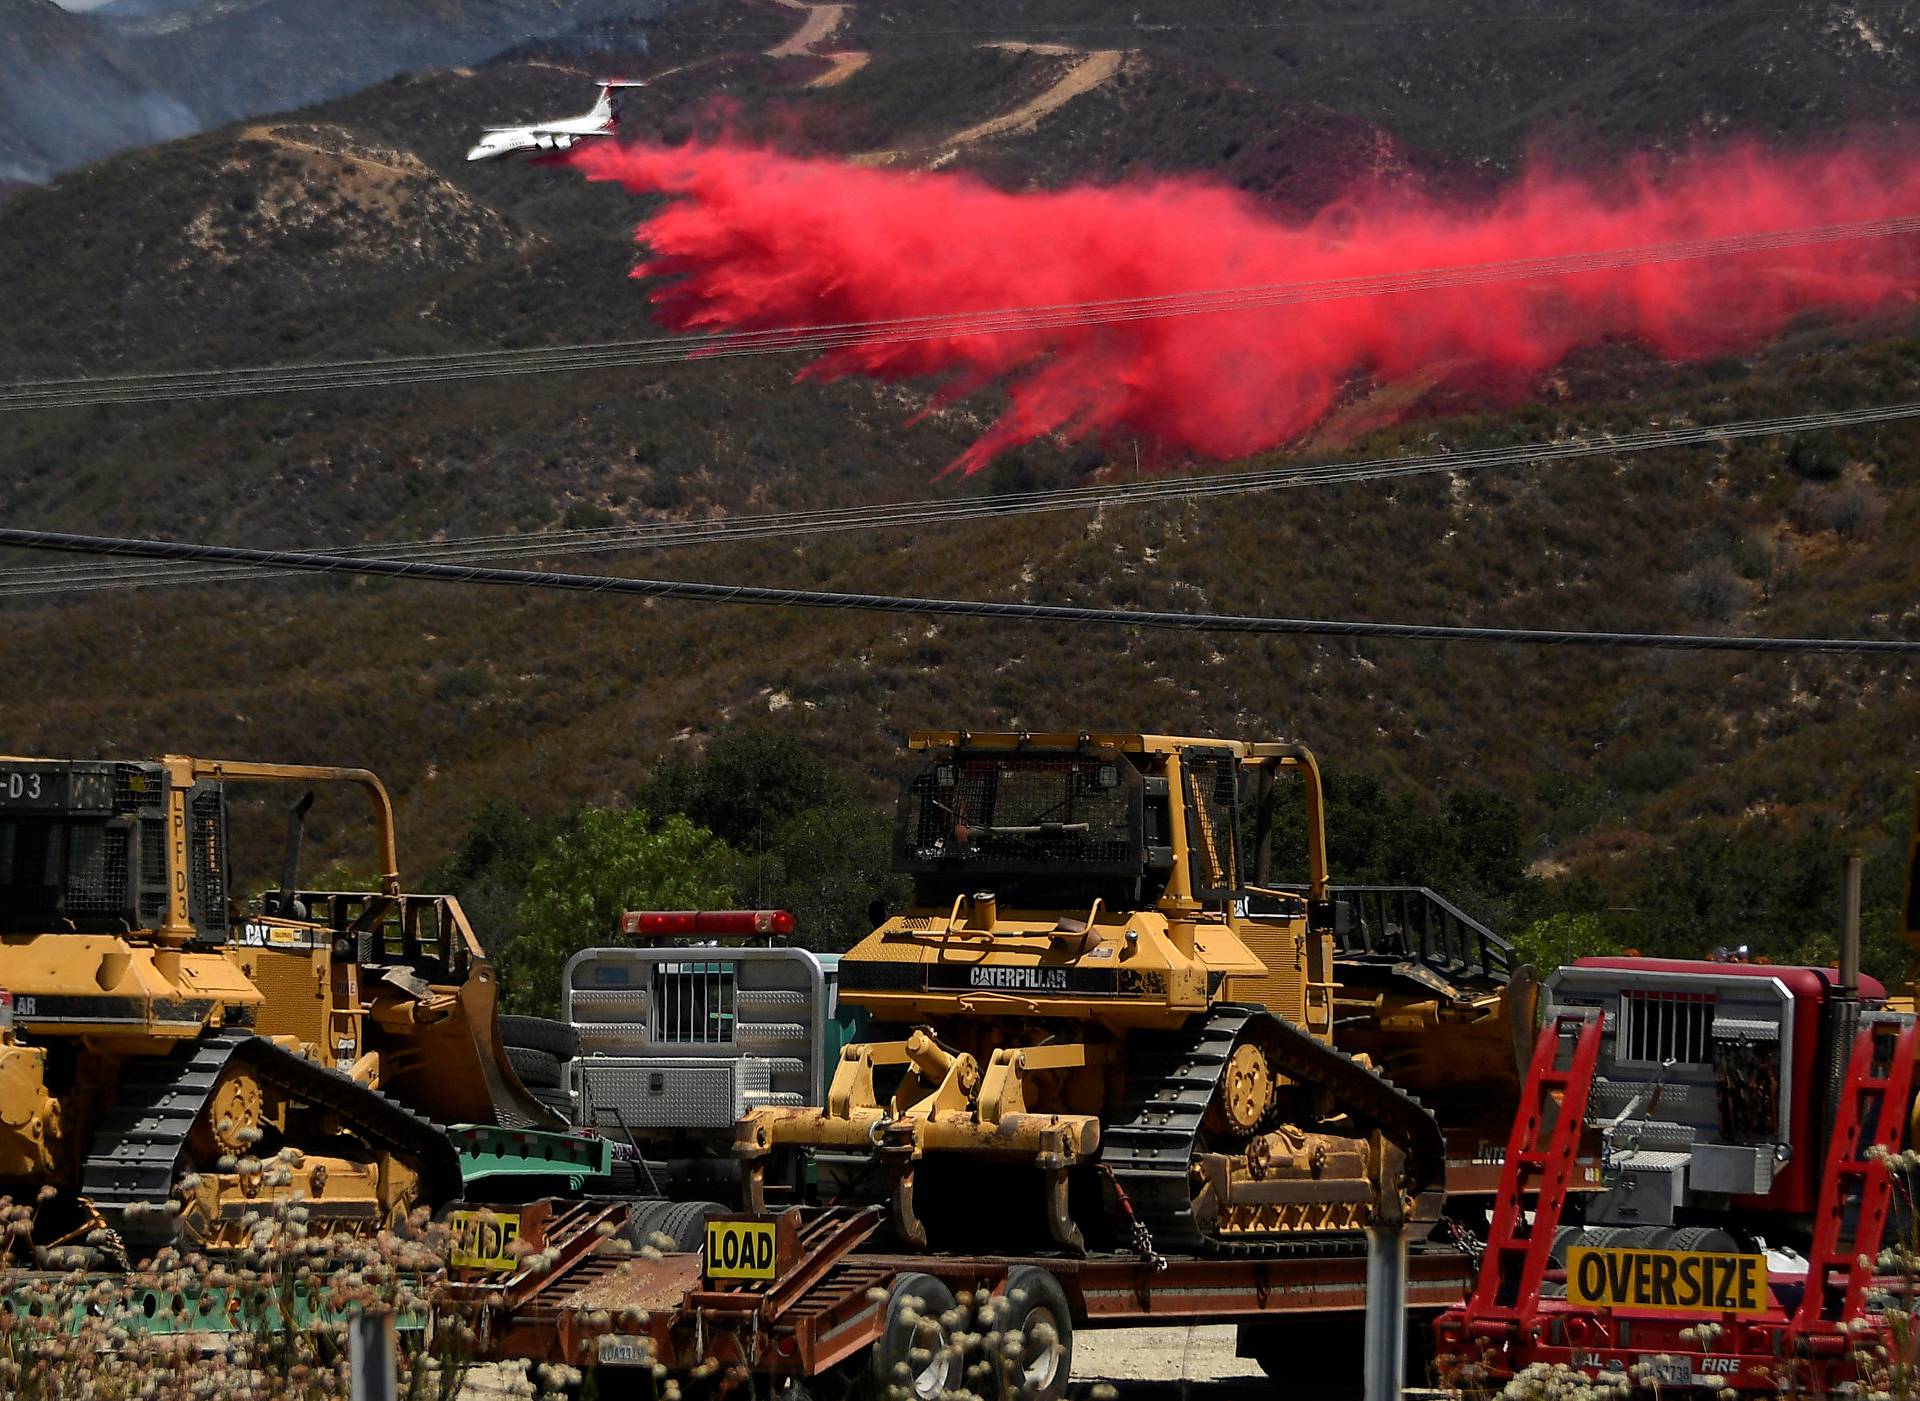 A fire fighting aircraft makes a retardant drop as fire fighters continue to battle the so-called Sand Fire in the Angeles National Forest near Los Angeles, California